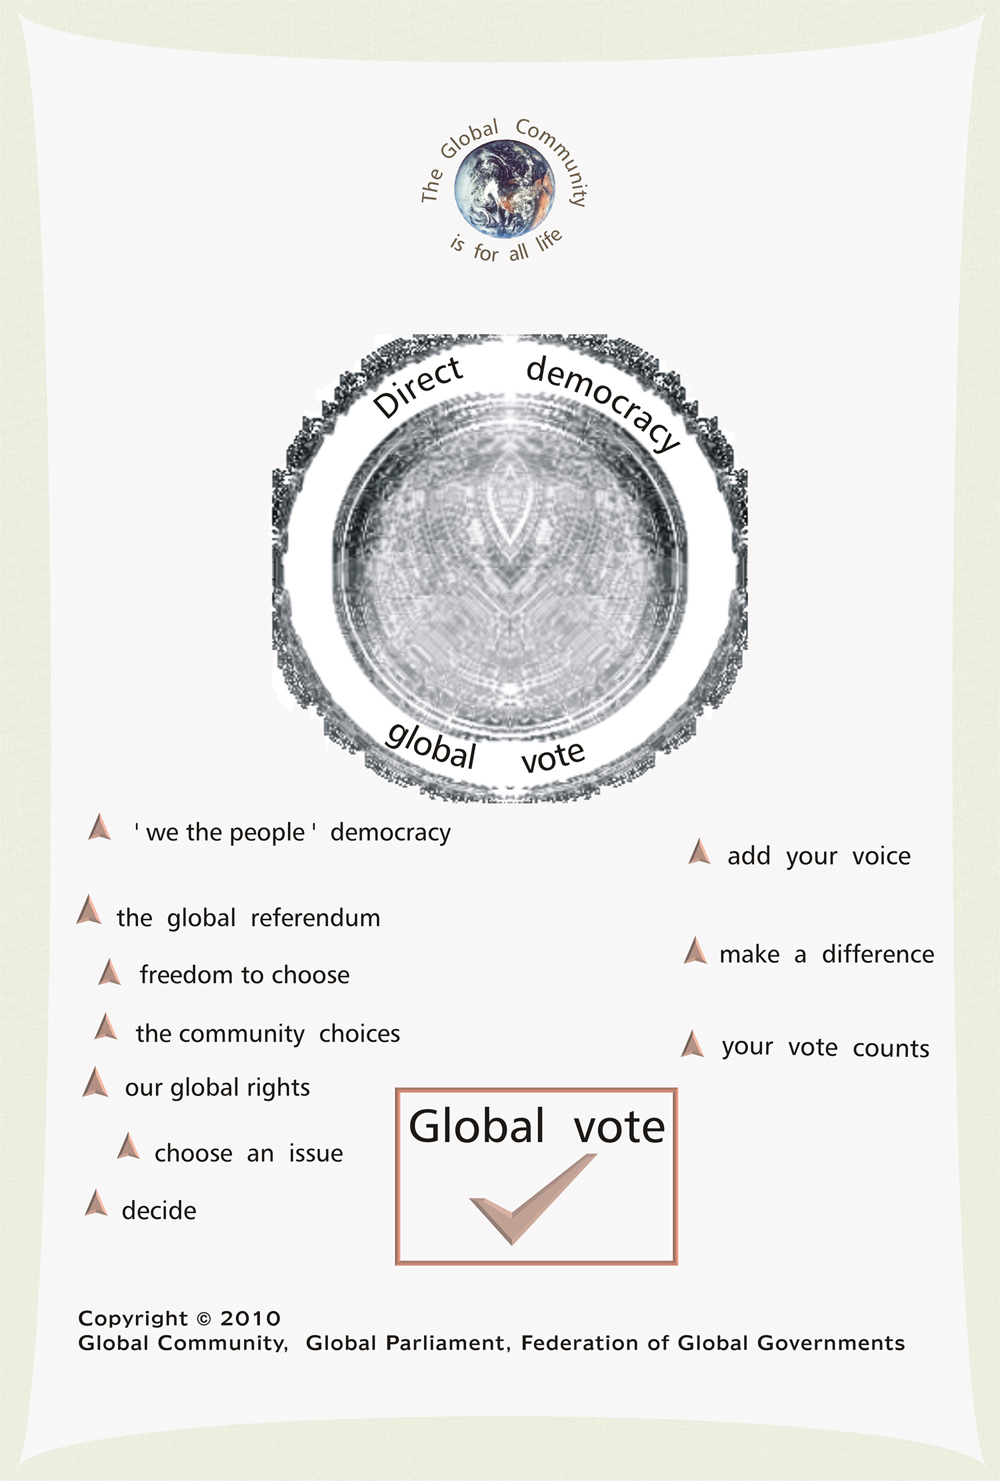 Global voting on issues